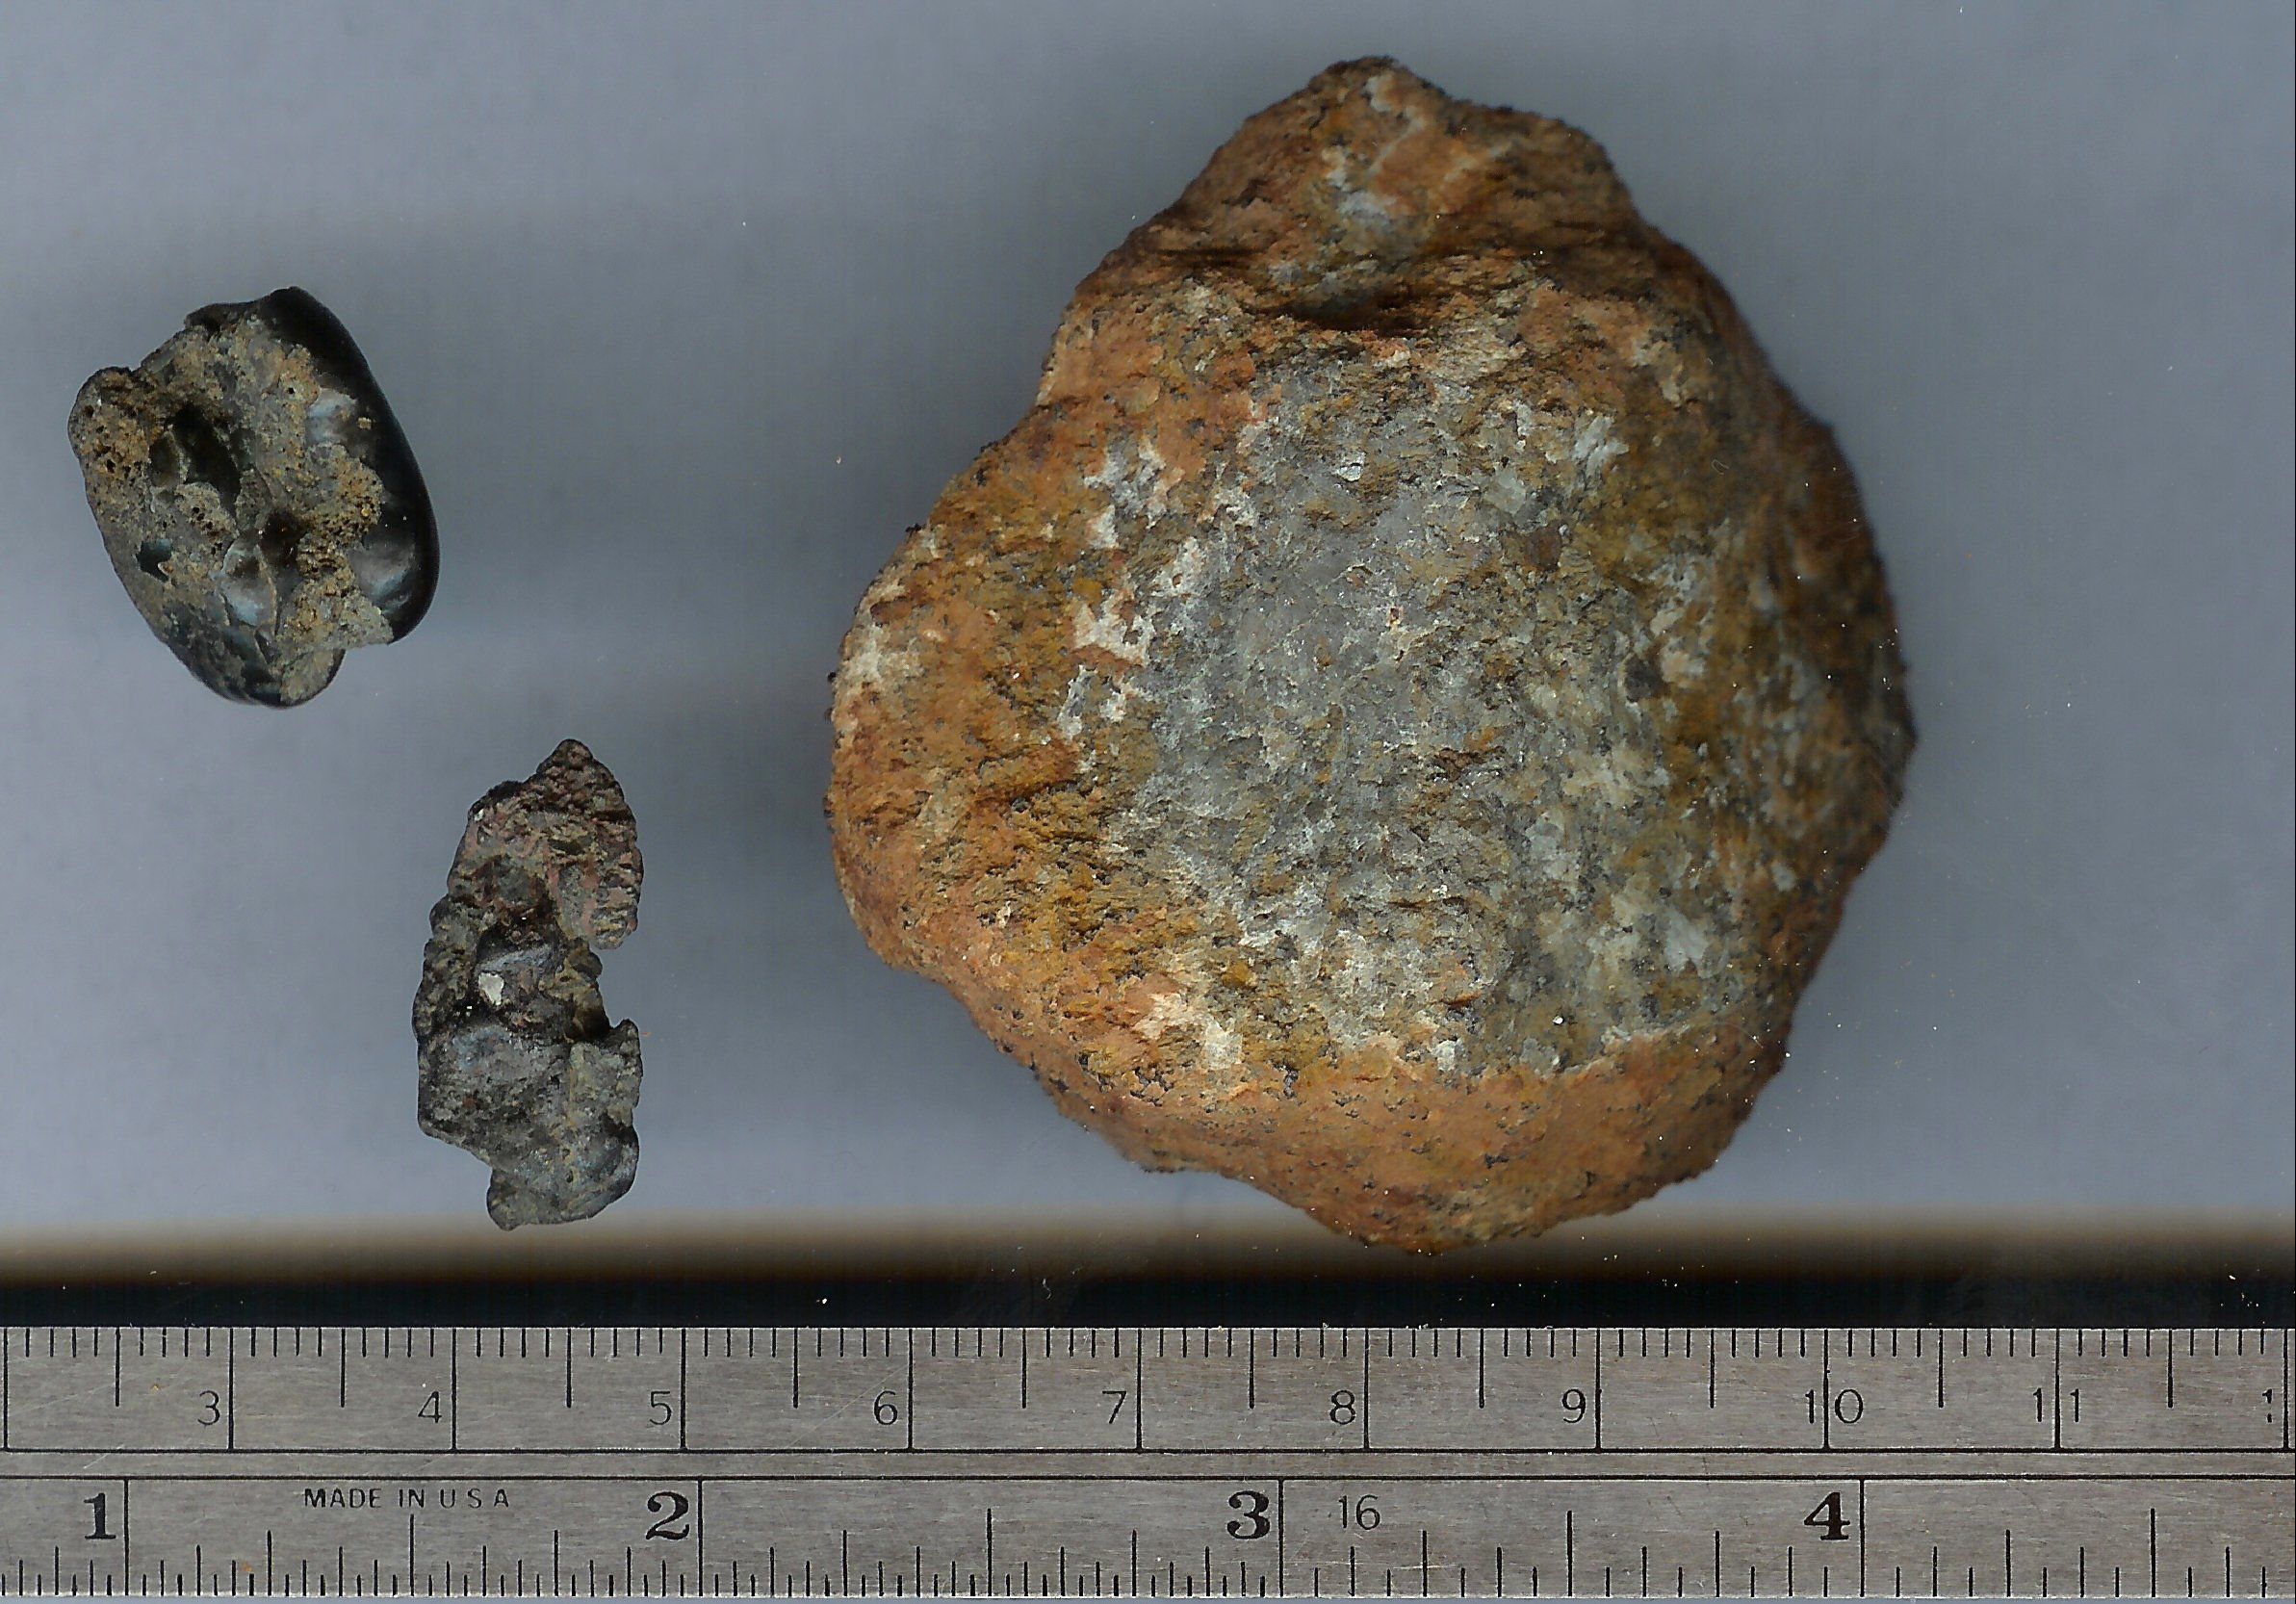 NOT meteorites - When I first got interested in rocks, I focused on finding meteorites, which in turn got me interested in metal detecting. For a few 